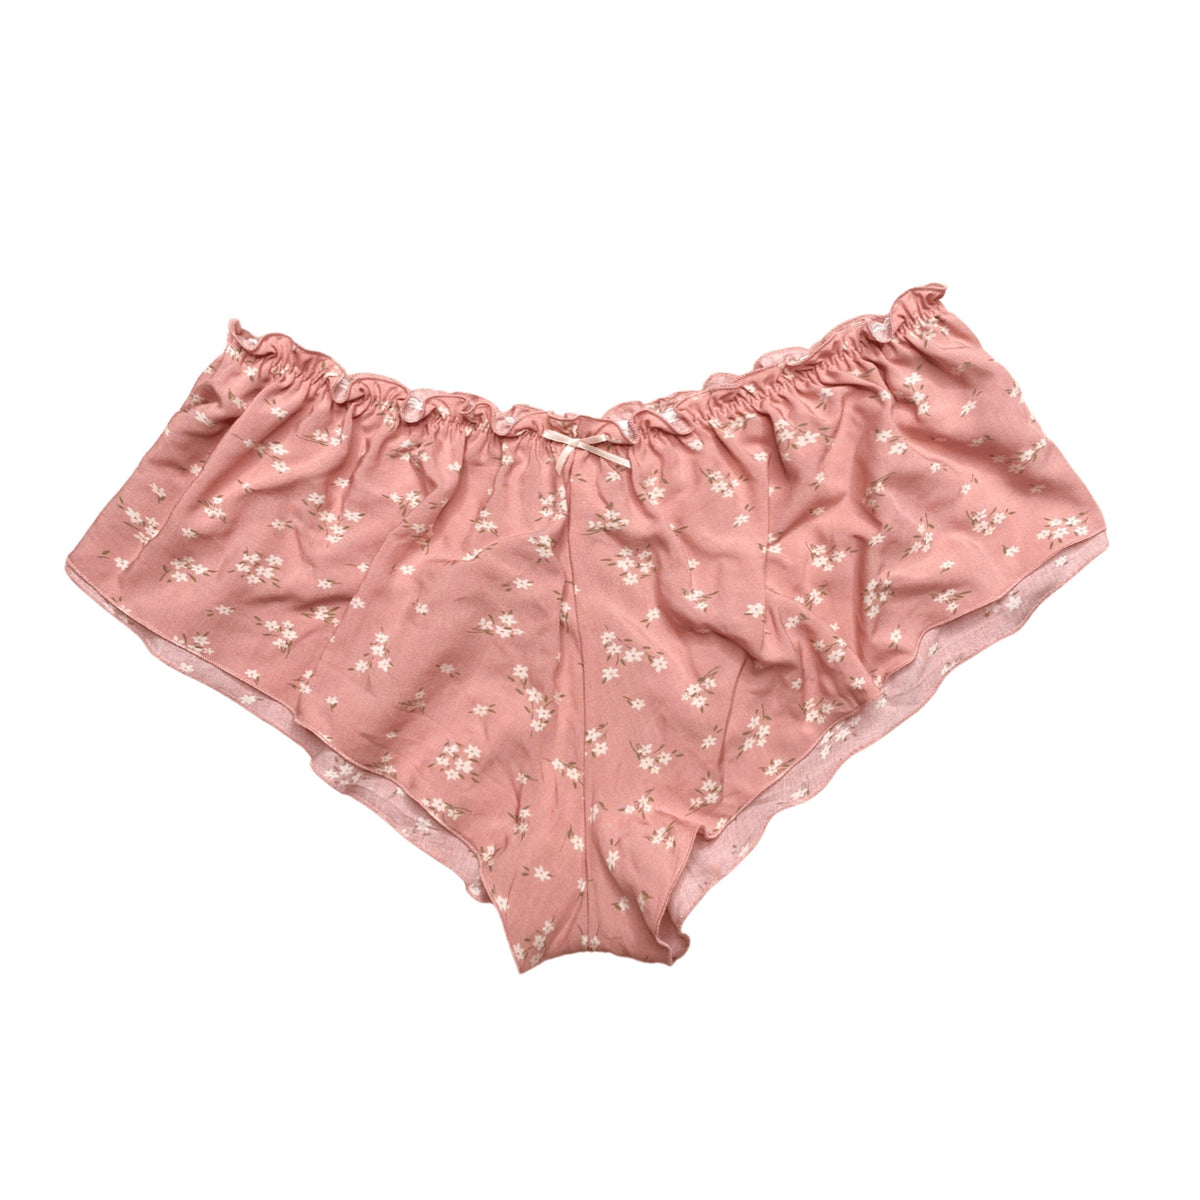 Classic French Knicker - Dusty Floral Rayon